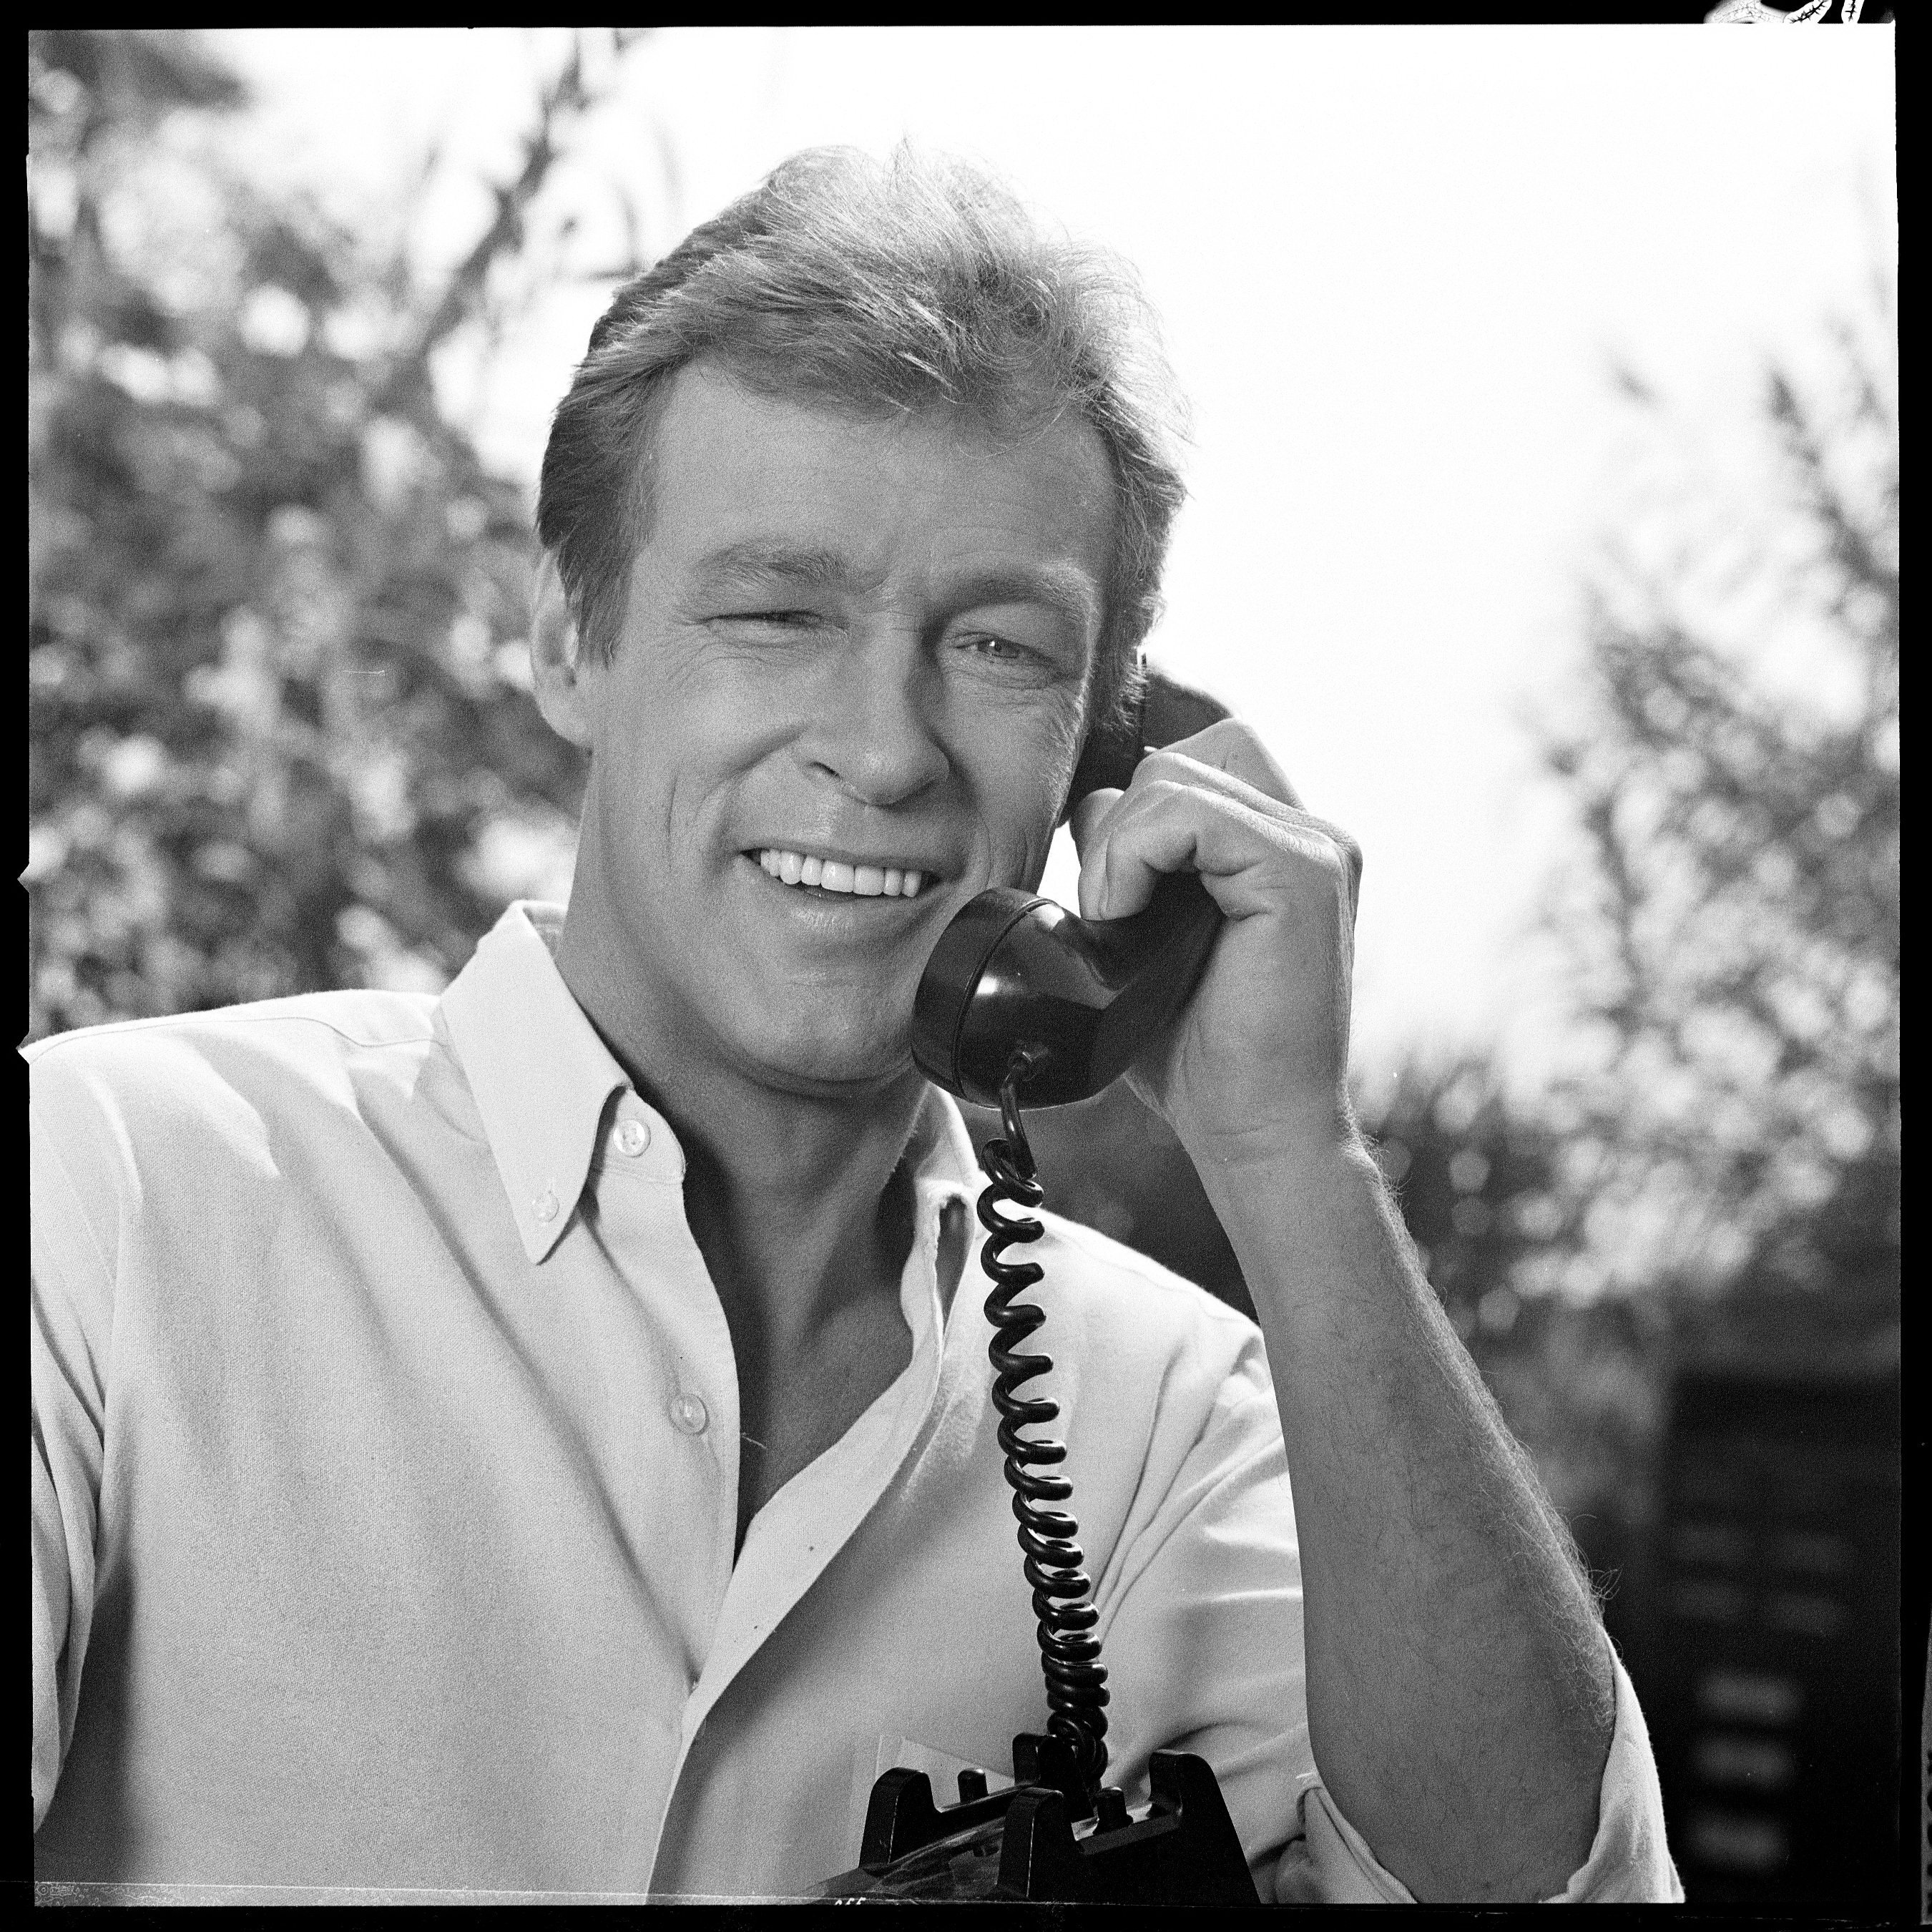 Russell Johnson as Professor Roy Hinkley in an episode of "My Hero" in "Gilligan's Island" TV series photographed on August 17, 1965.  | Source: Getty Images